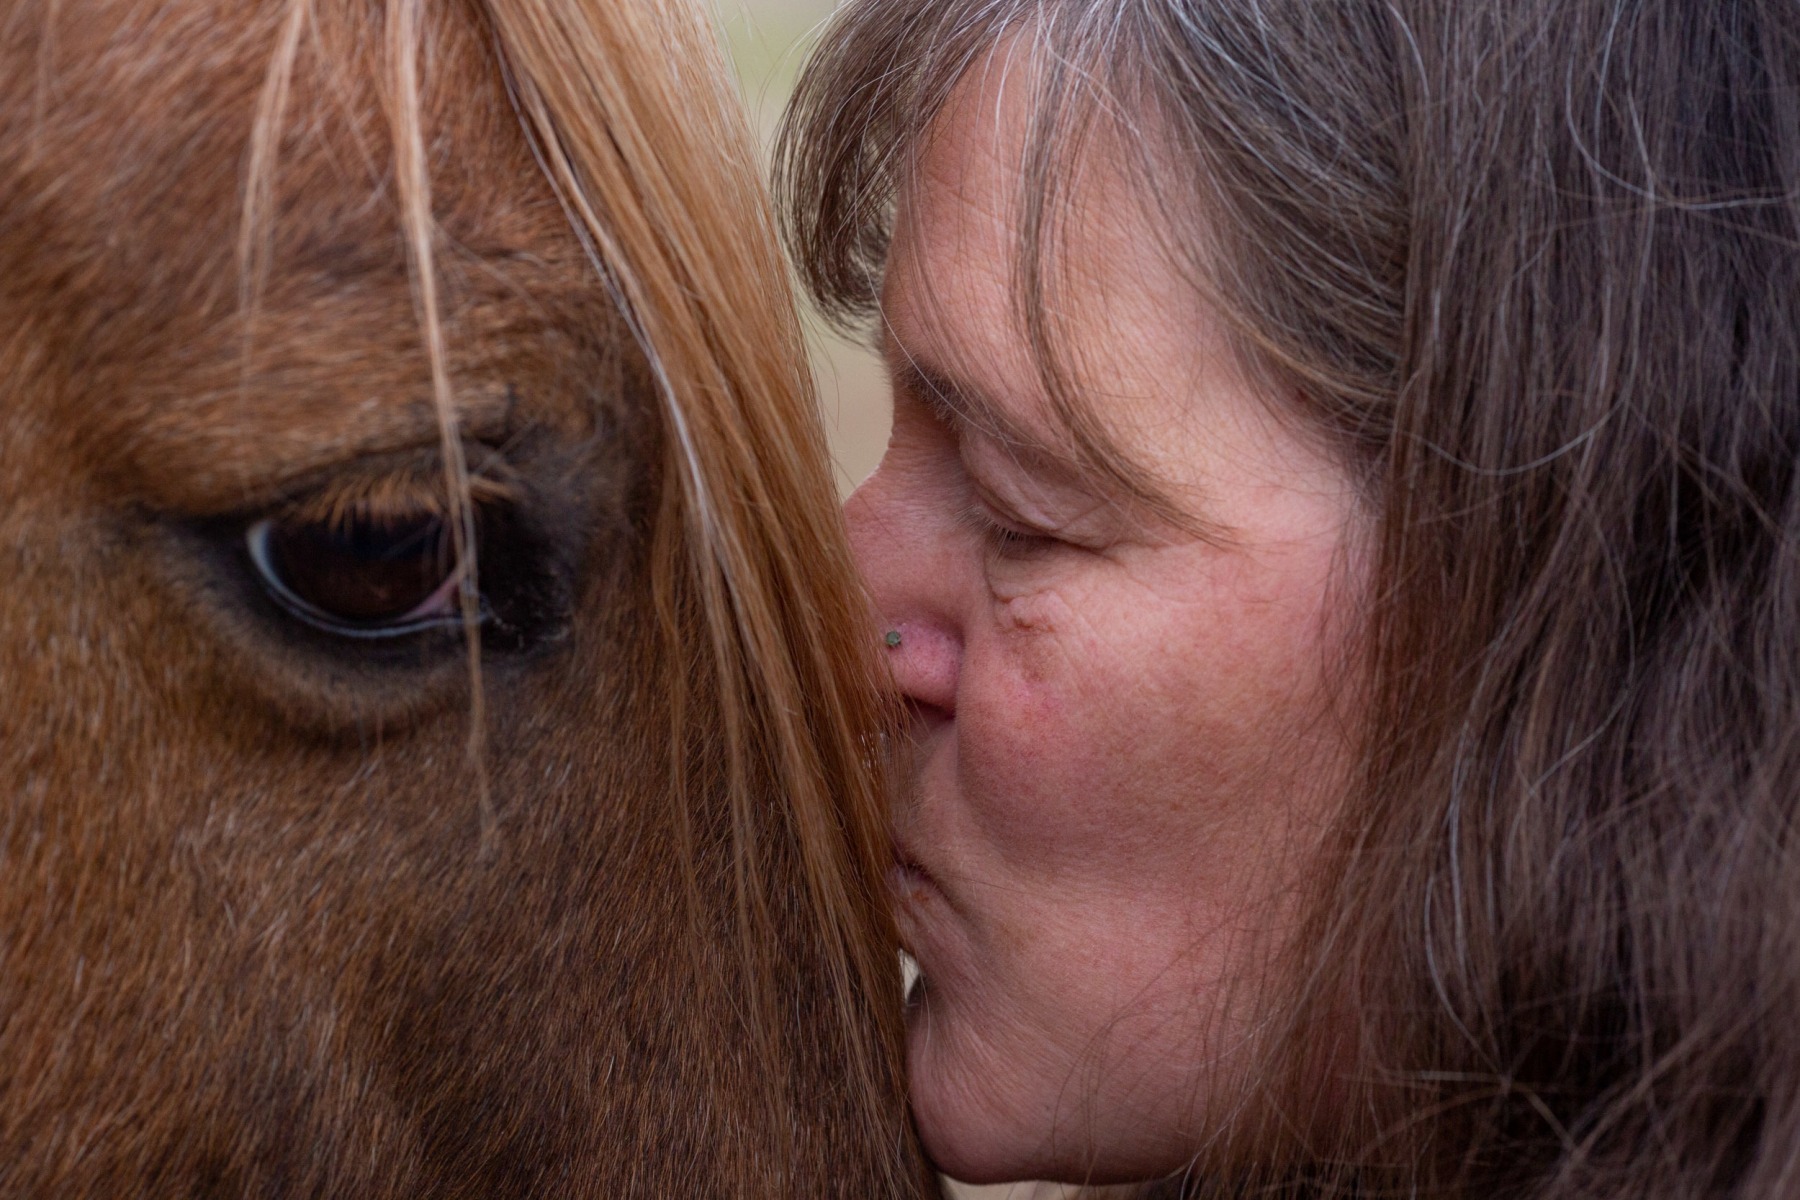 Vickie Seiter kisses one of her horses, Popcorn, after feeding him. Vickie moved to Chesterhill four years ago to fulfill her dream of starting a life-coach business where she uses horses to support her clients. “This is my church,” Vickie says about her small horse farm.